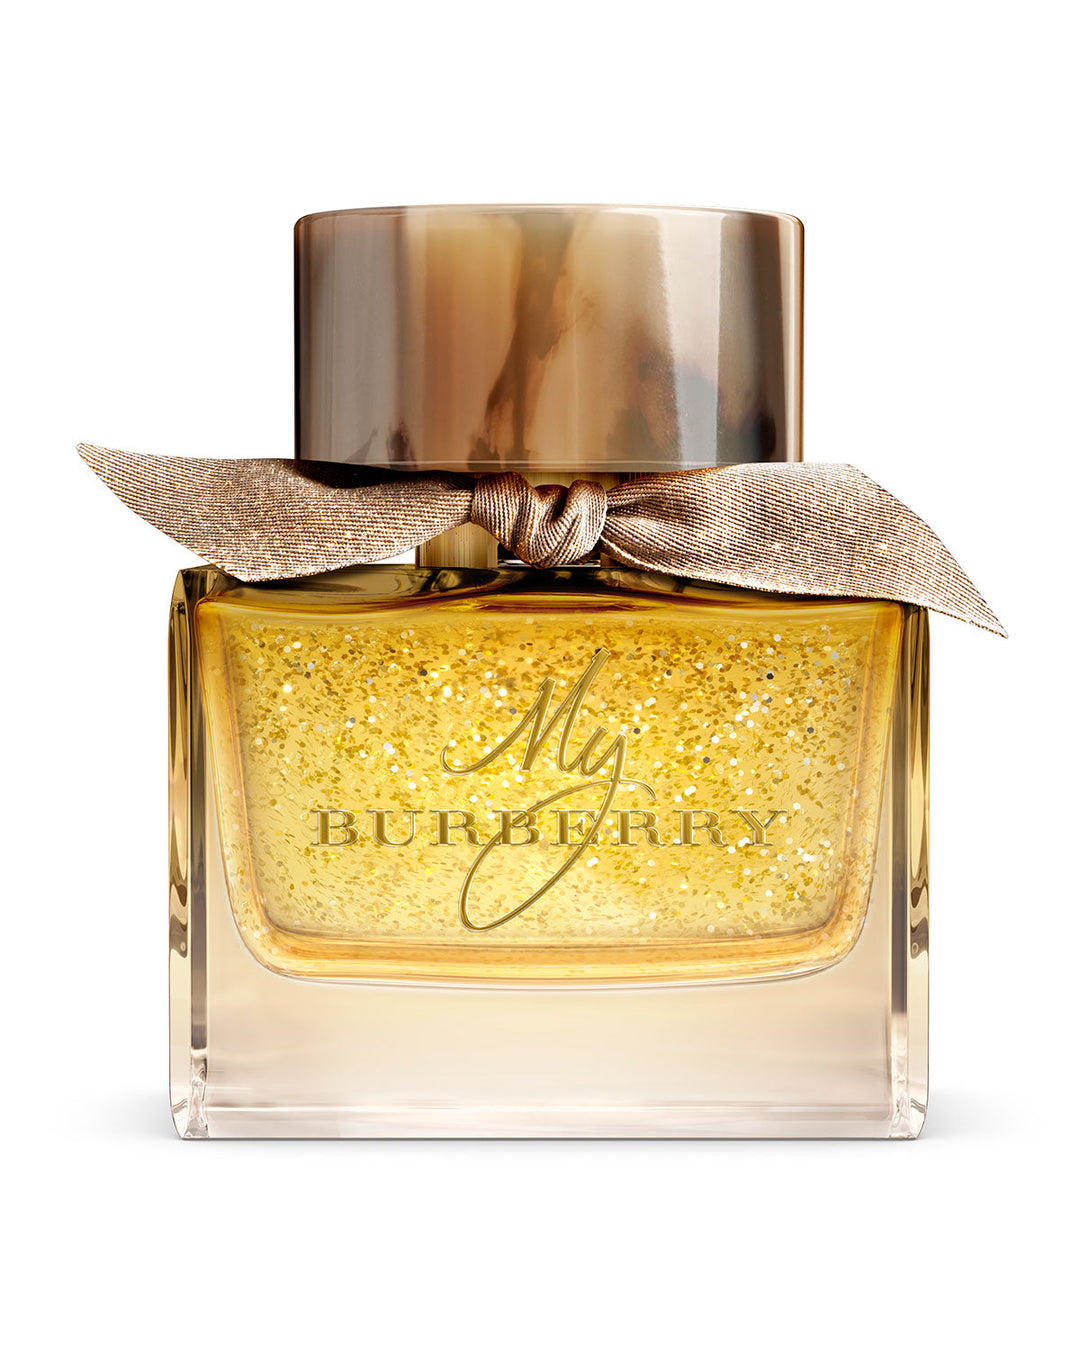 Burberry My Burberry Gold EDP Perfume For Women